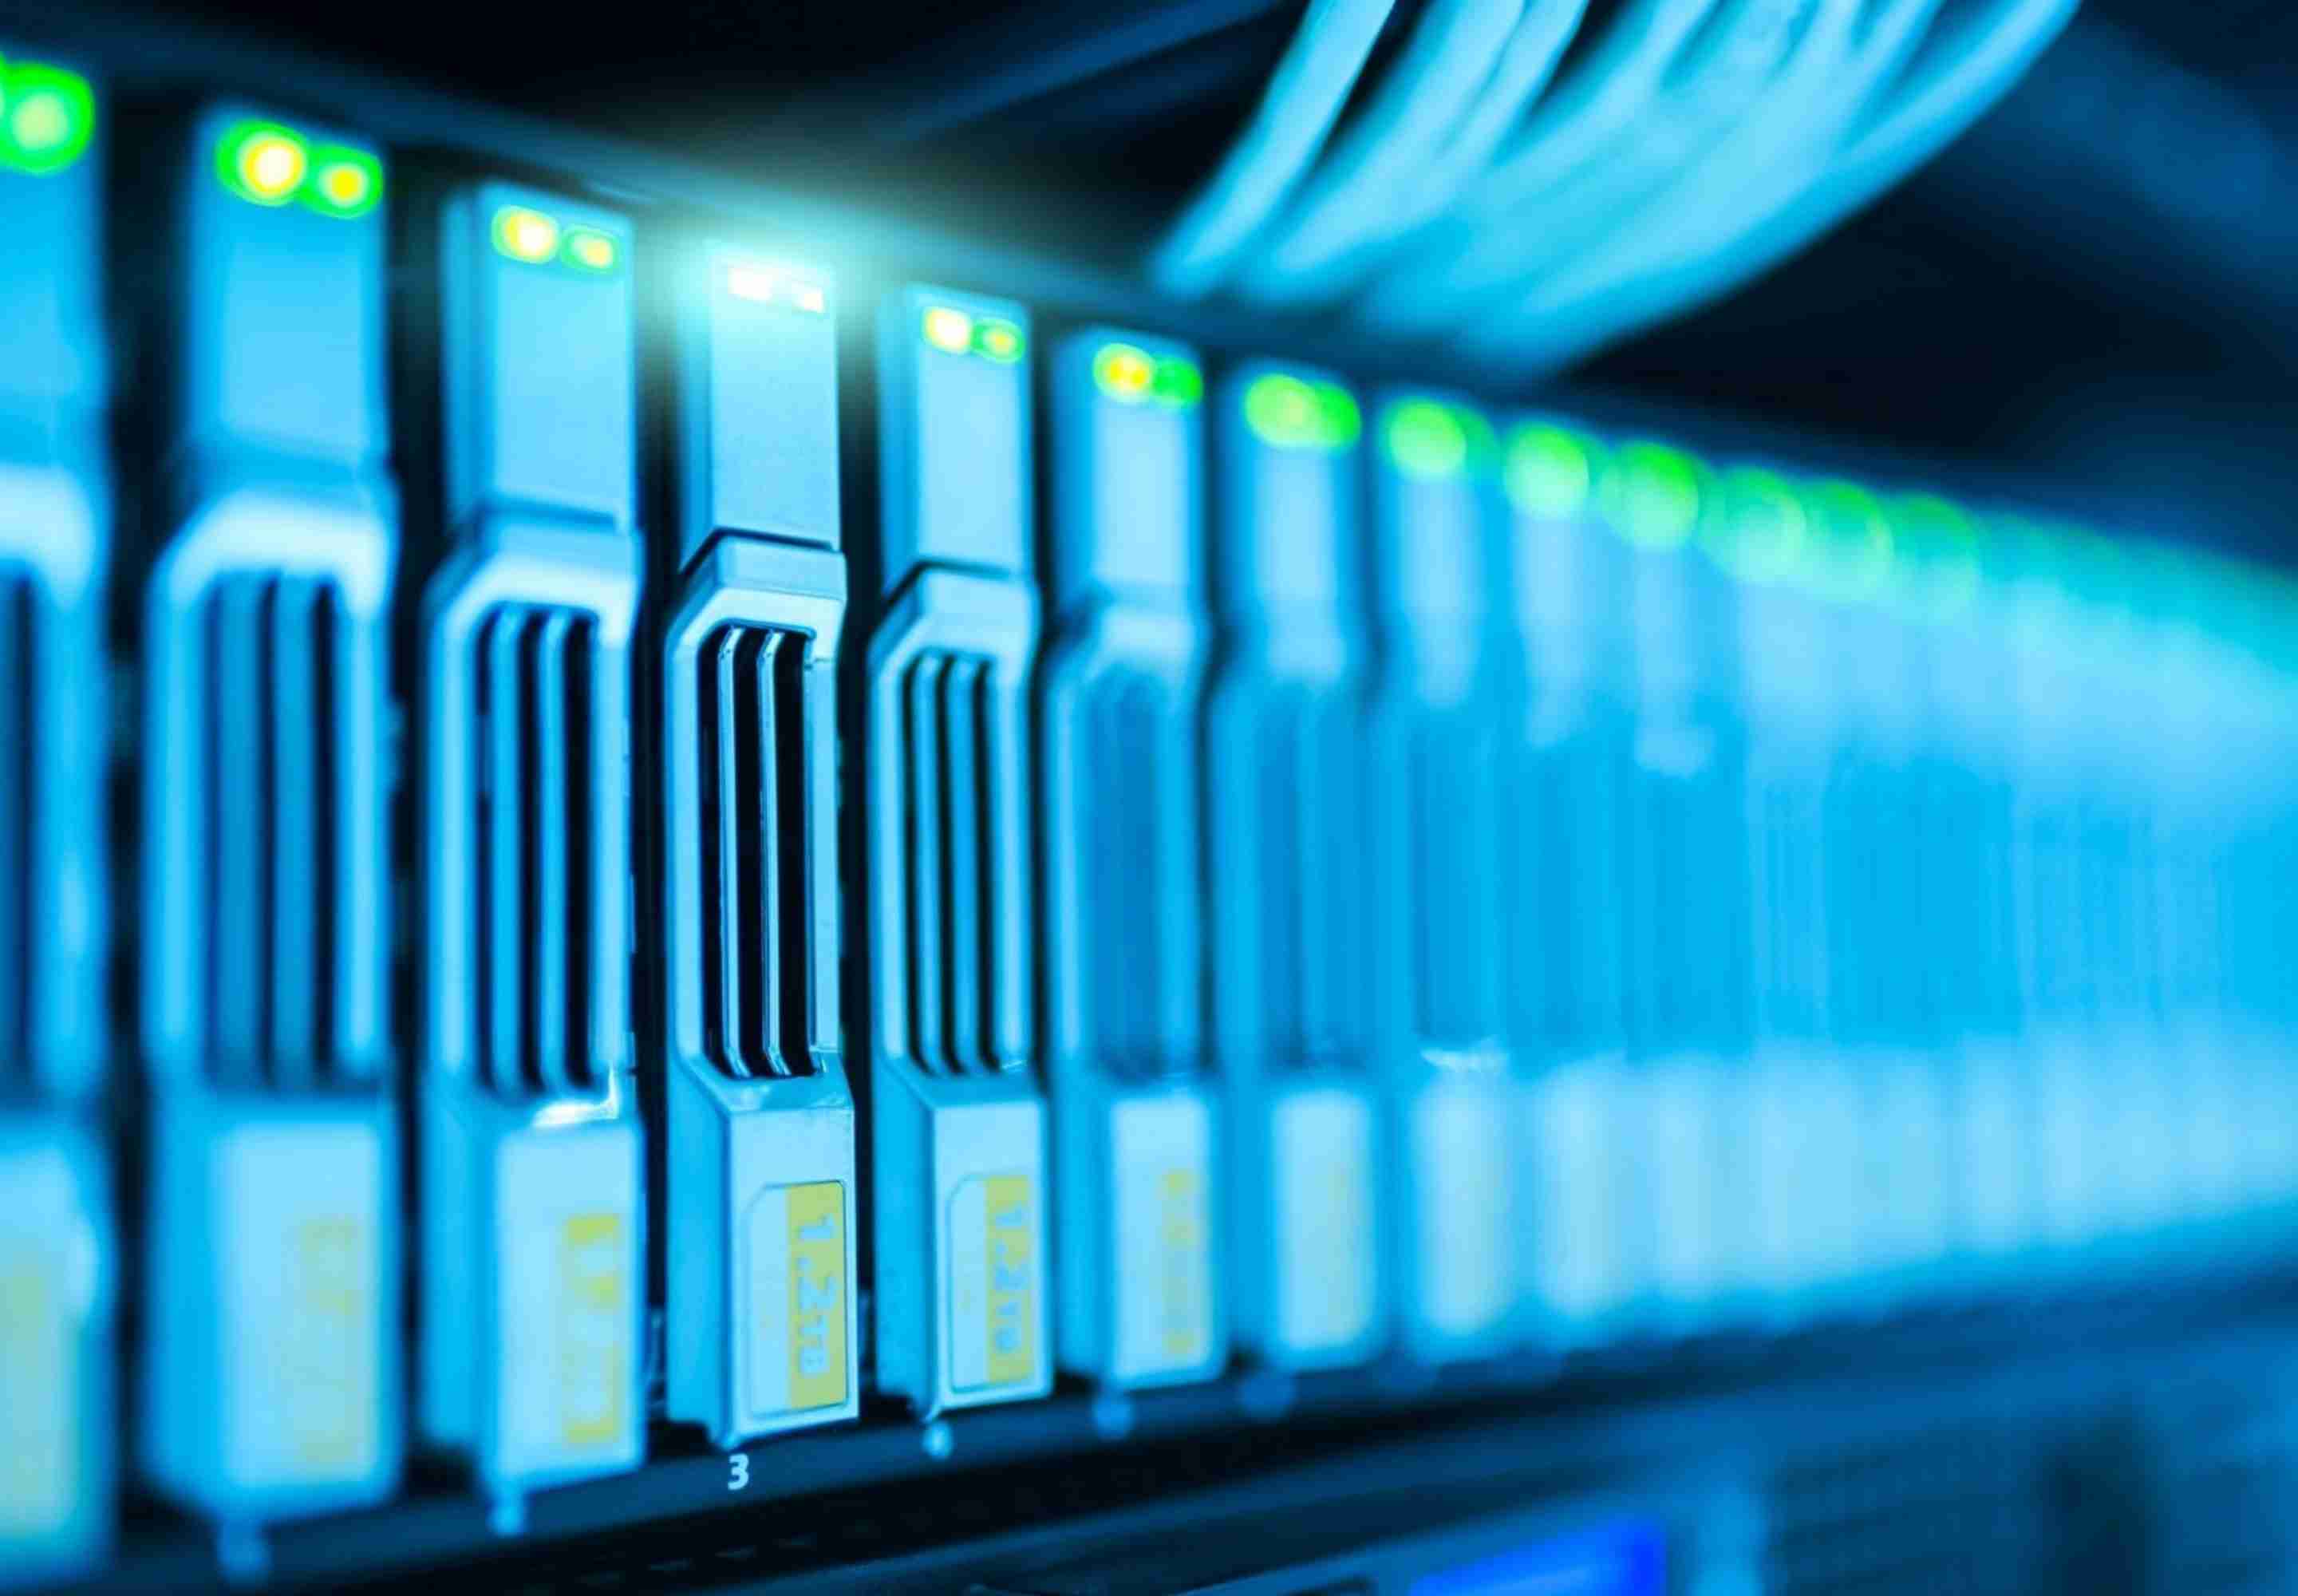 Hottest data center technologies and trends